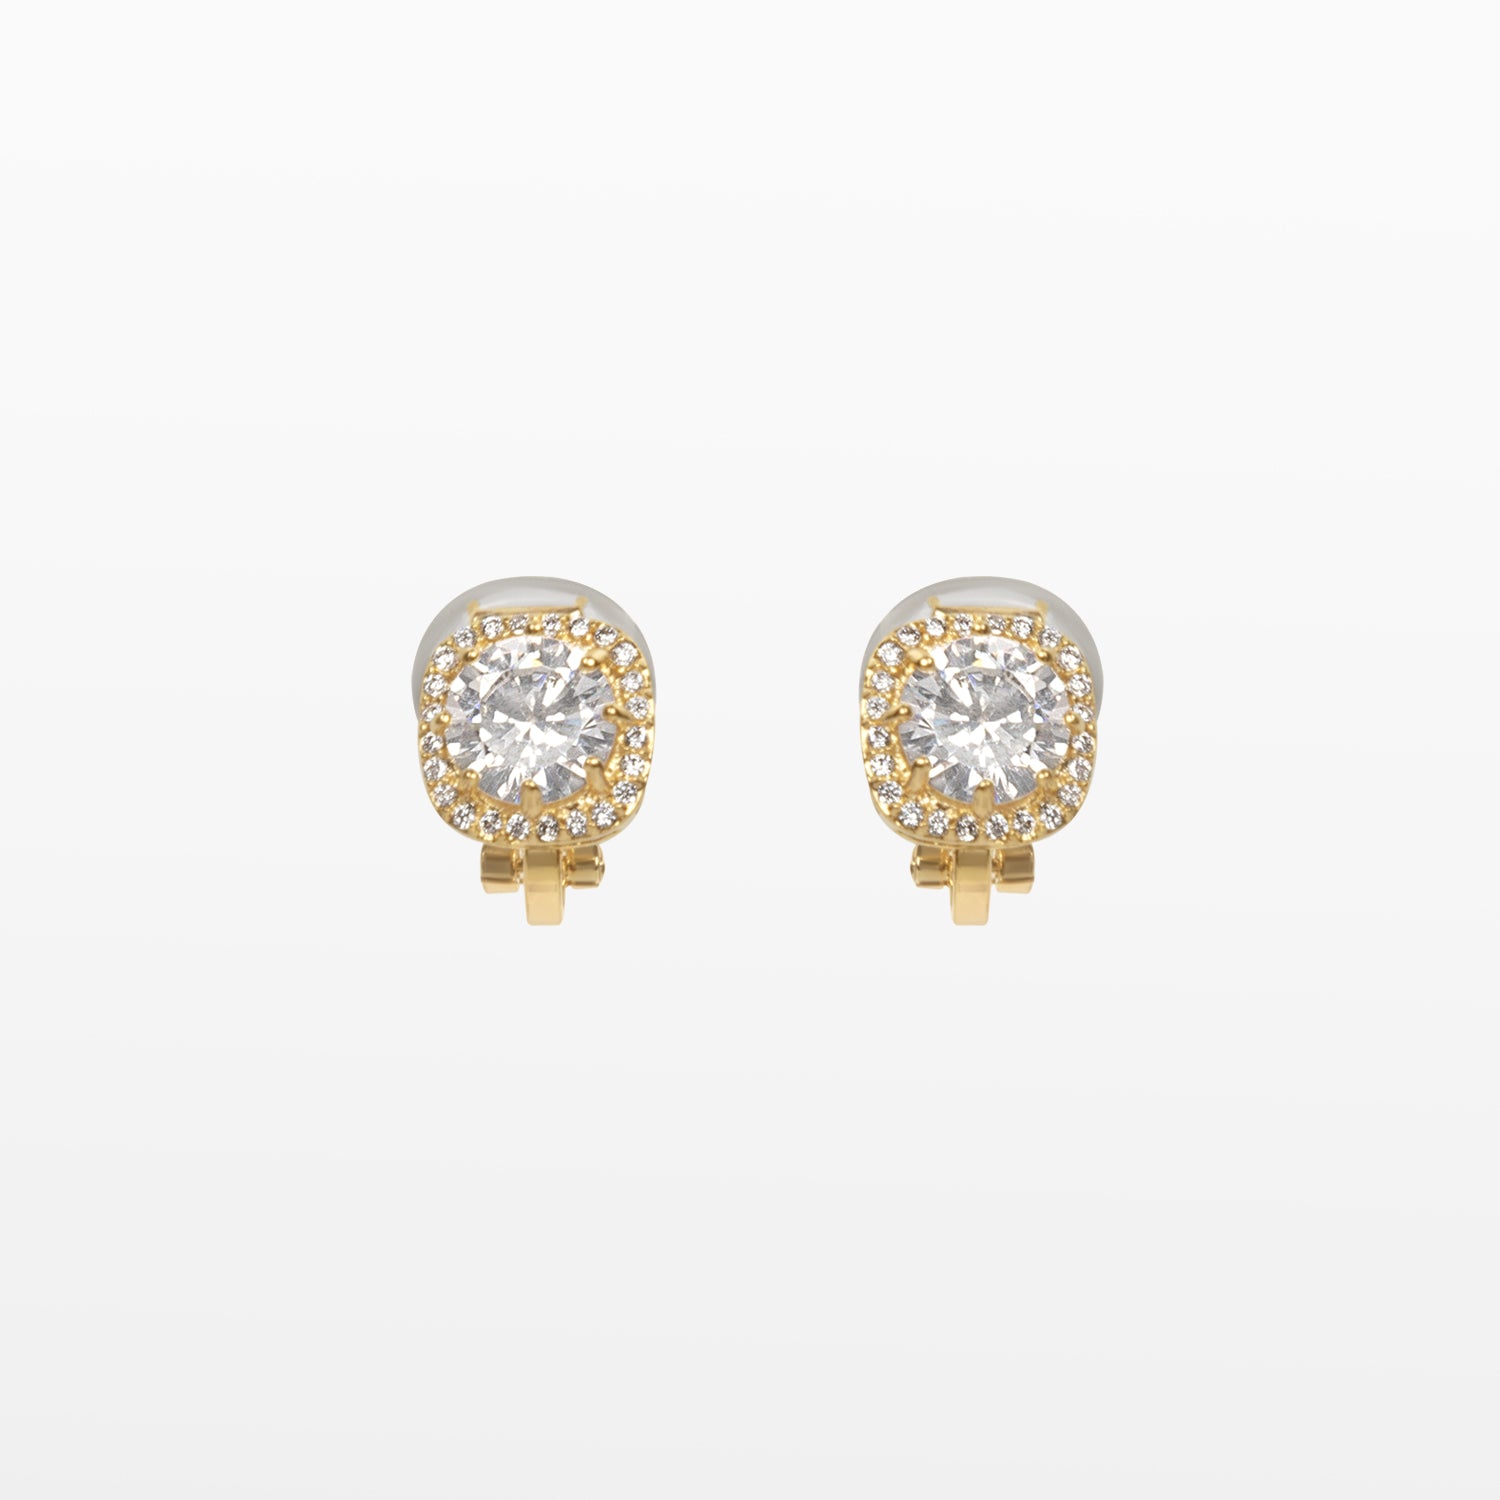 Image of the Cushion Stud Clip-On Earrings in Gold boast a padded closure type and are suited for all types of ears. With secure hold and comfortable wear duration of up to 8-12 hours, this one pair of earrings is crafted from gold plated copper and finished with Cubic Zirconia.